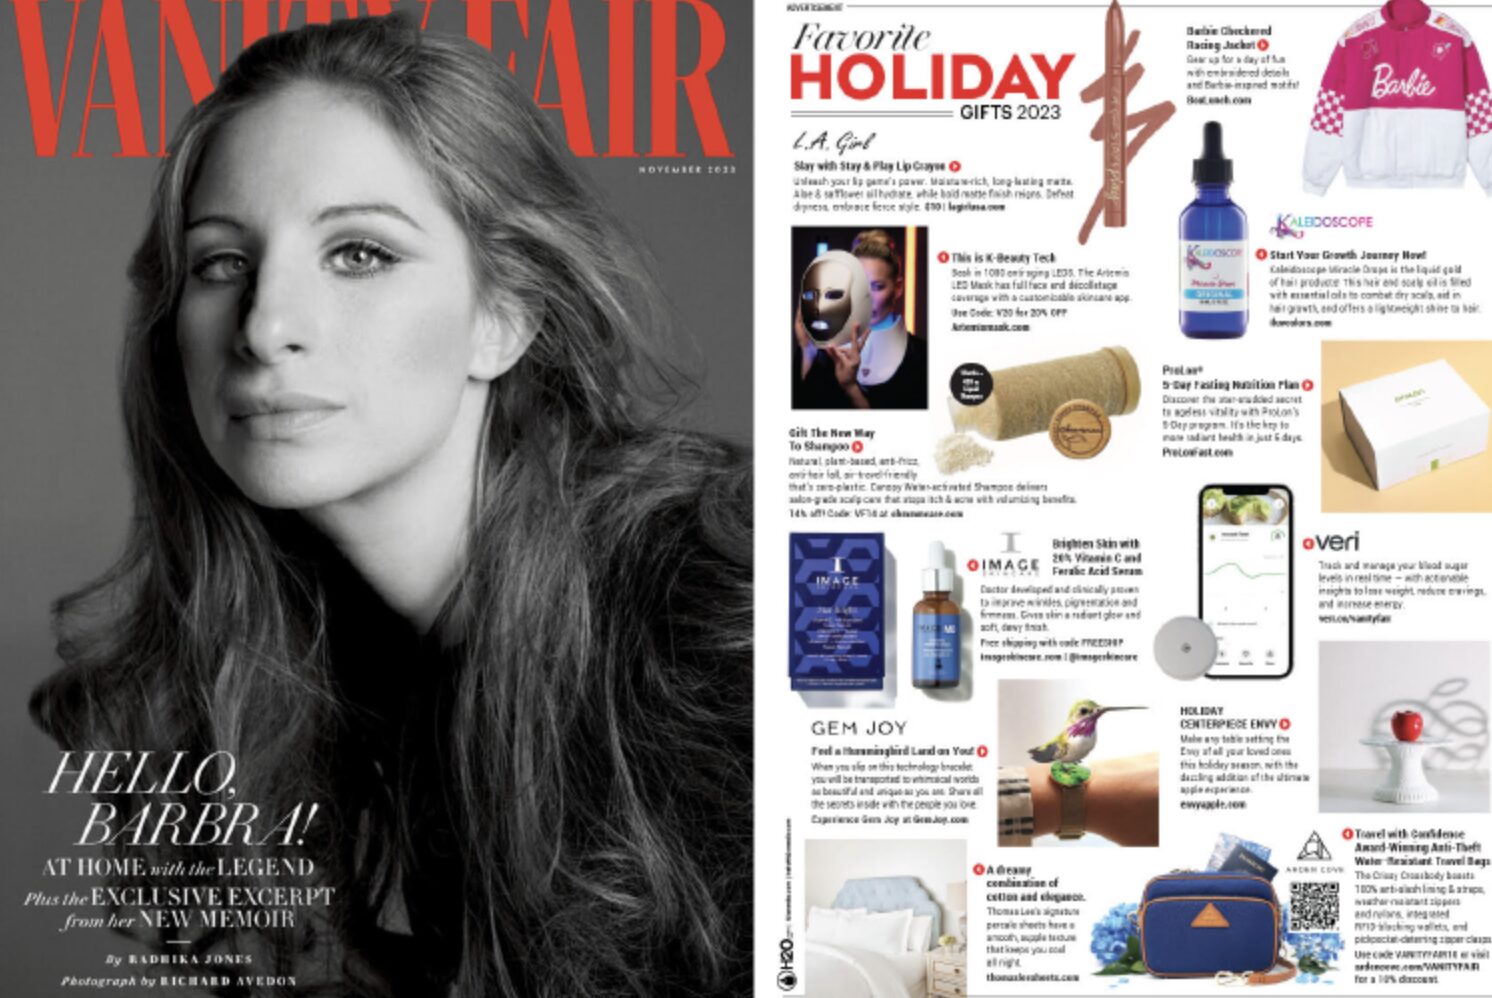 Envy™ Apples Included in VF’s Favorite Holiday Gifts